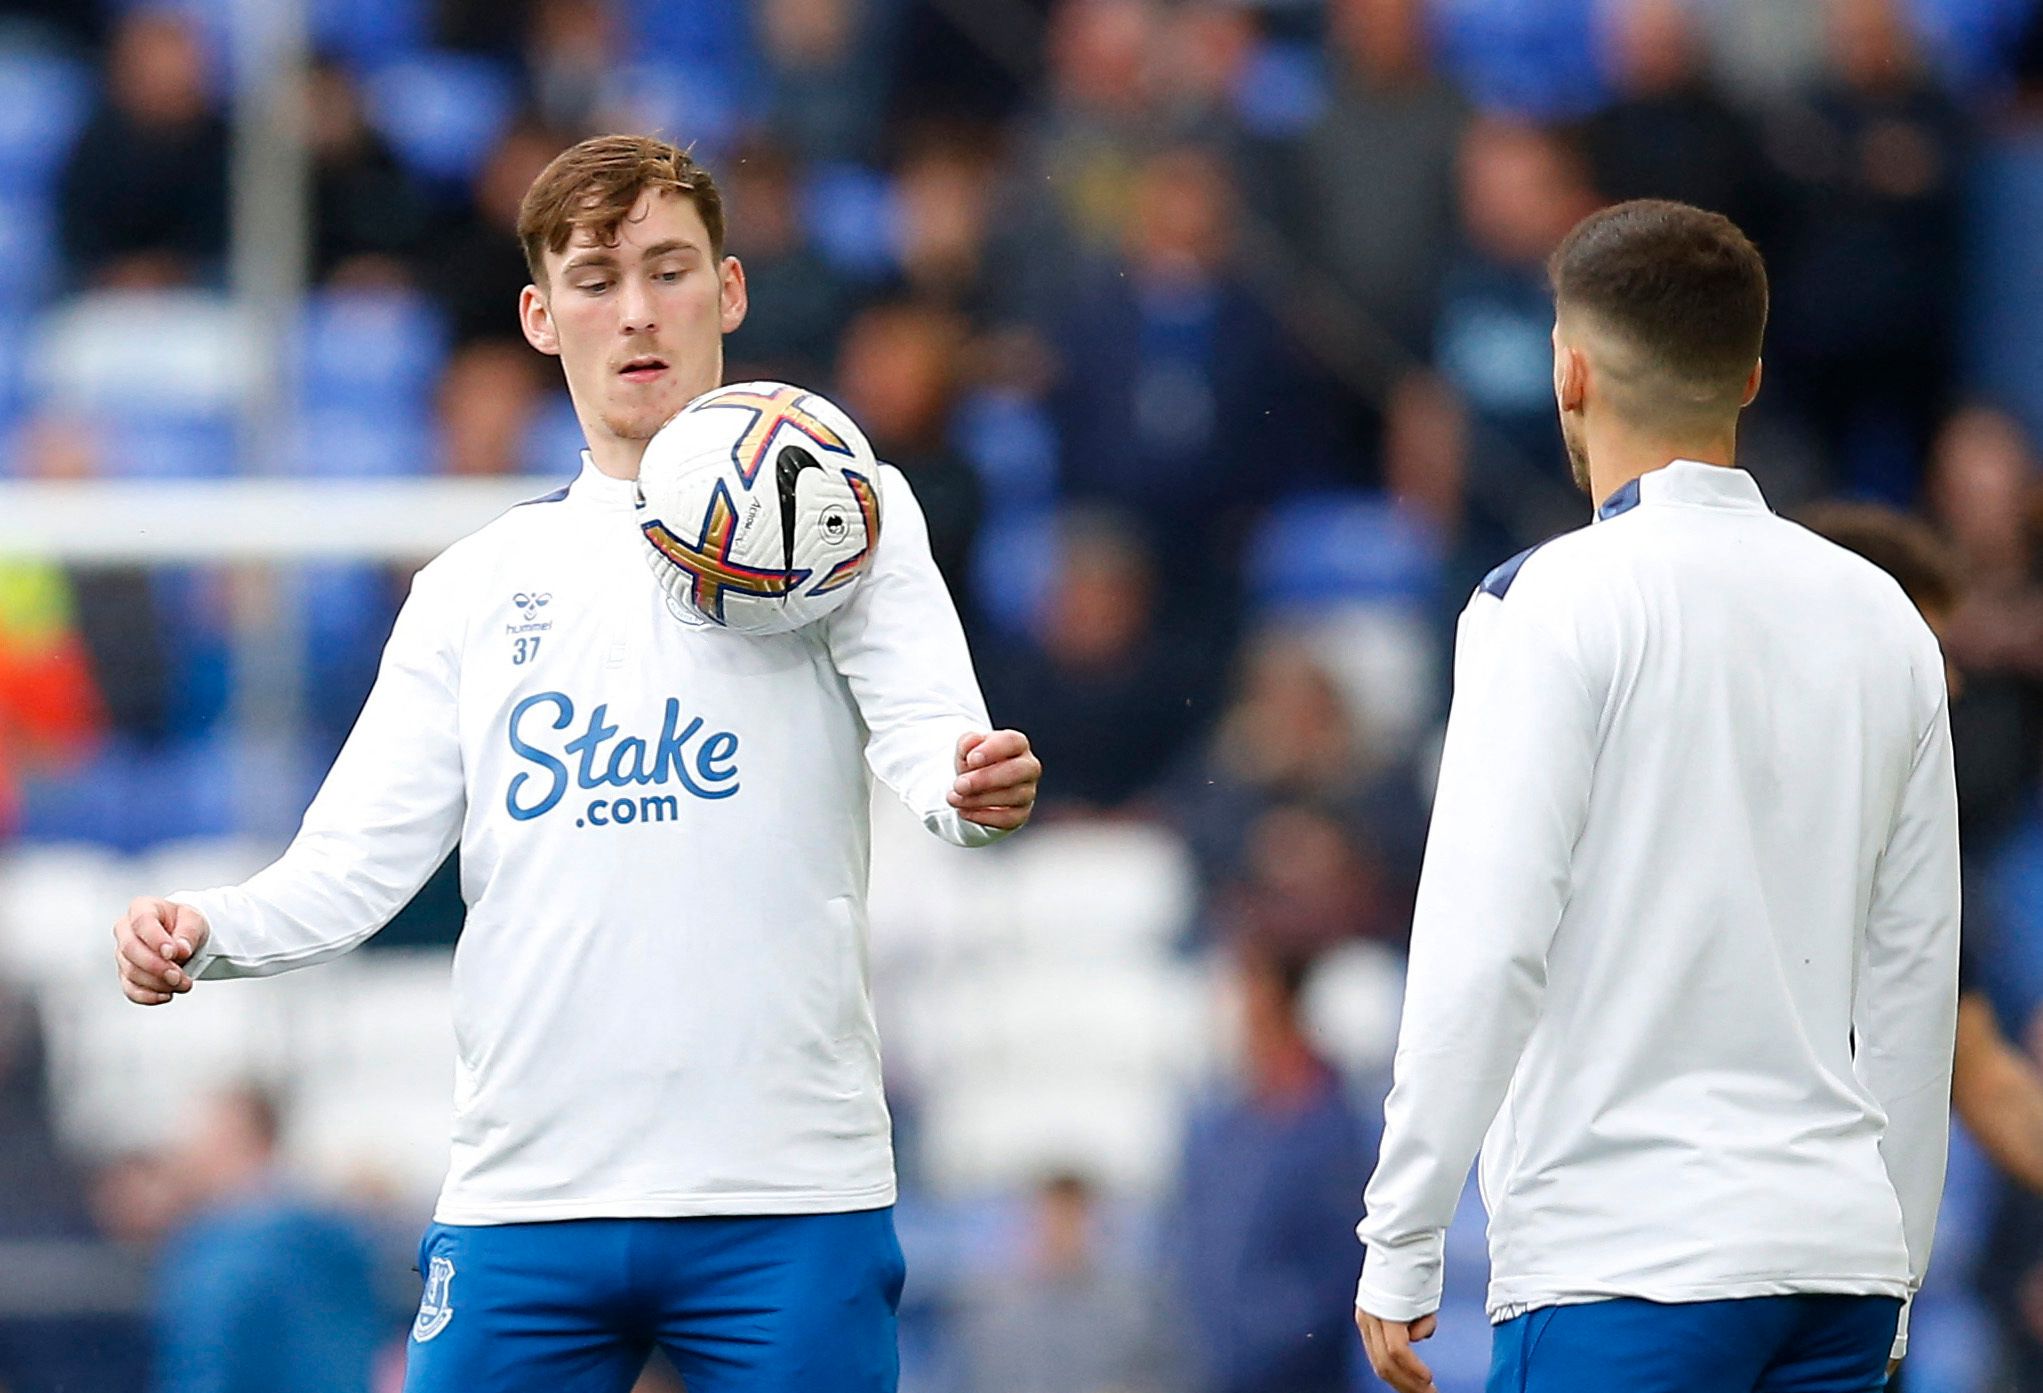 Everton: James Garner ‘completely ready’ to play against Manchester United -Everton News